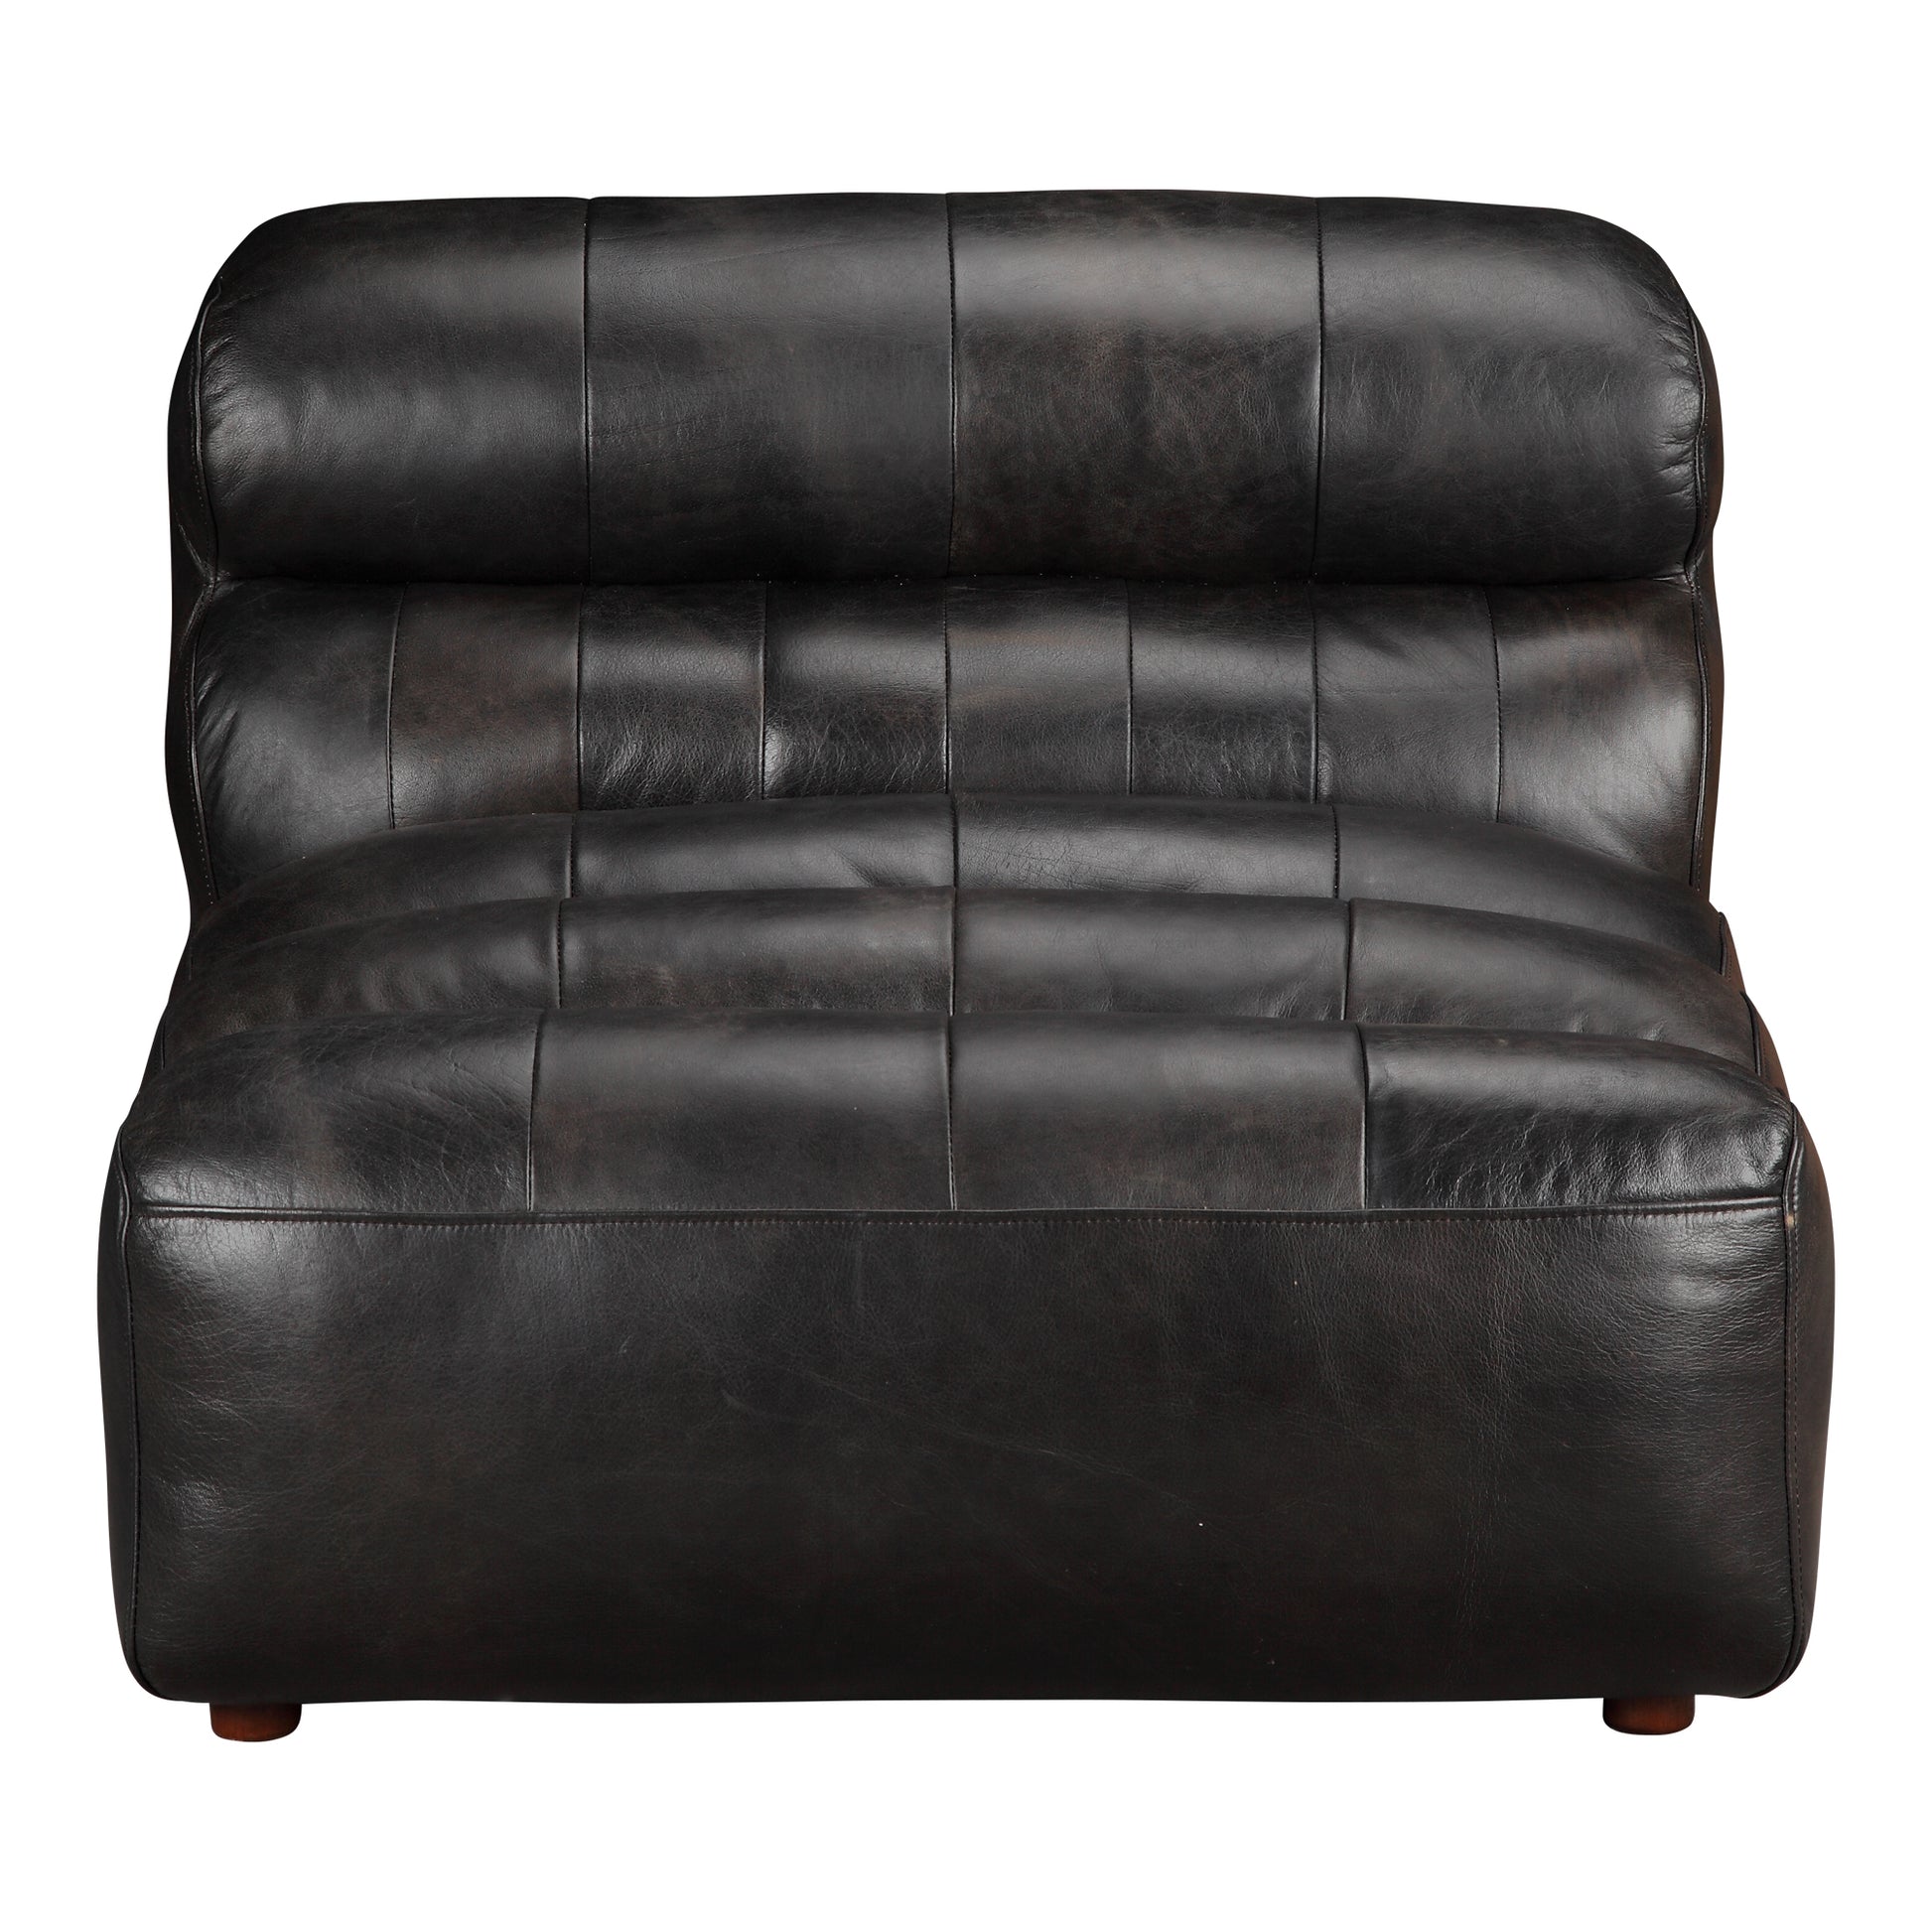 Ramsay Leather Slipper Chair QN-1009-01